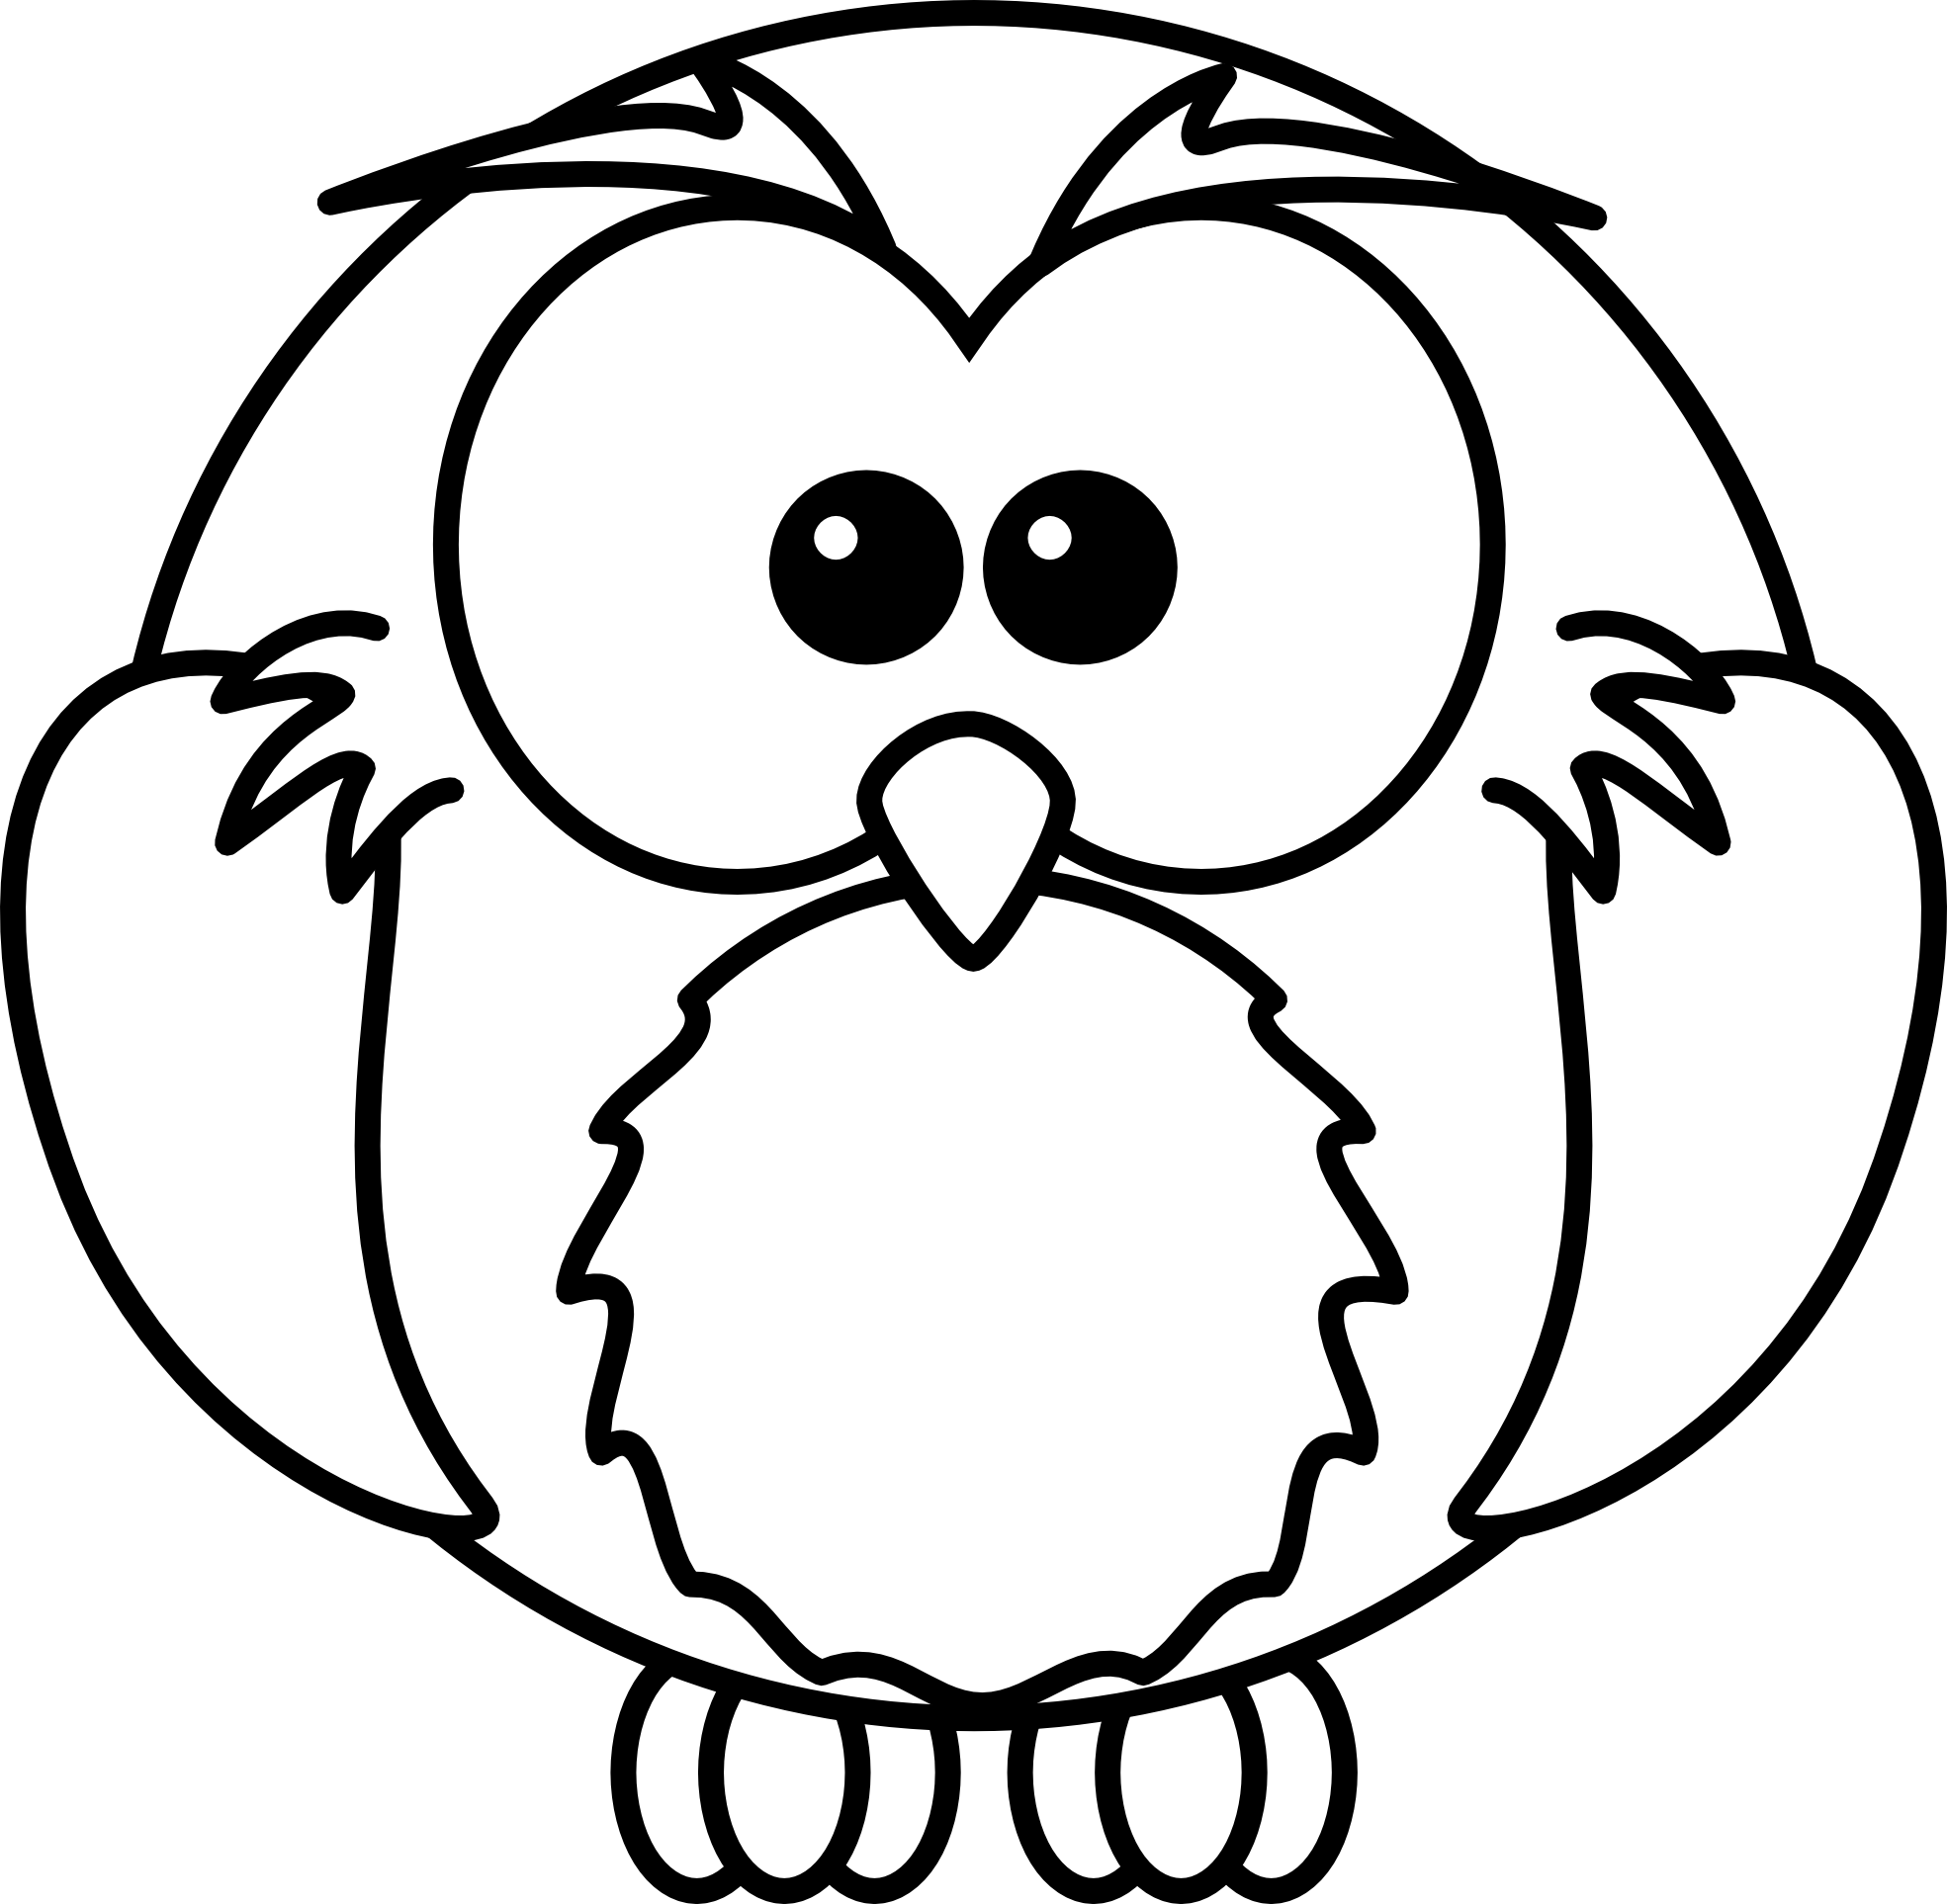 Baby Owl Clipart Black And Wh - Black And White Owl Clipart